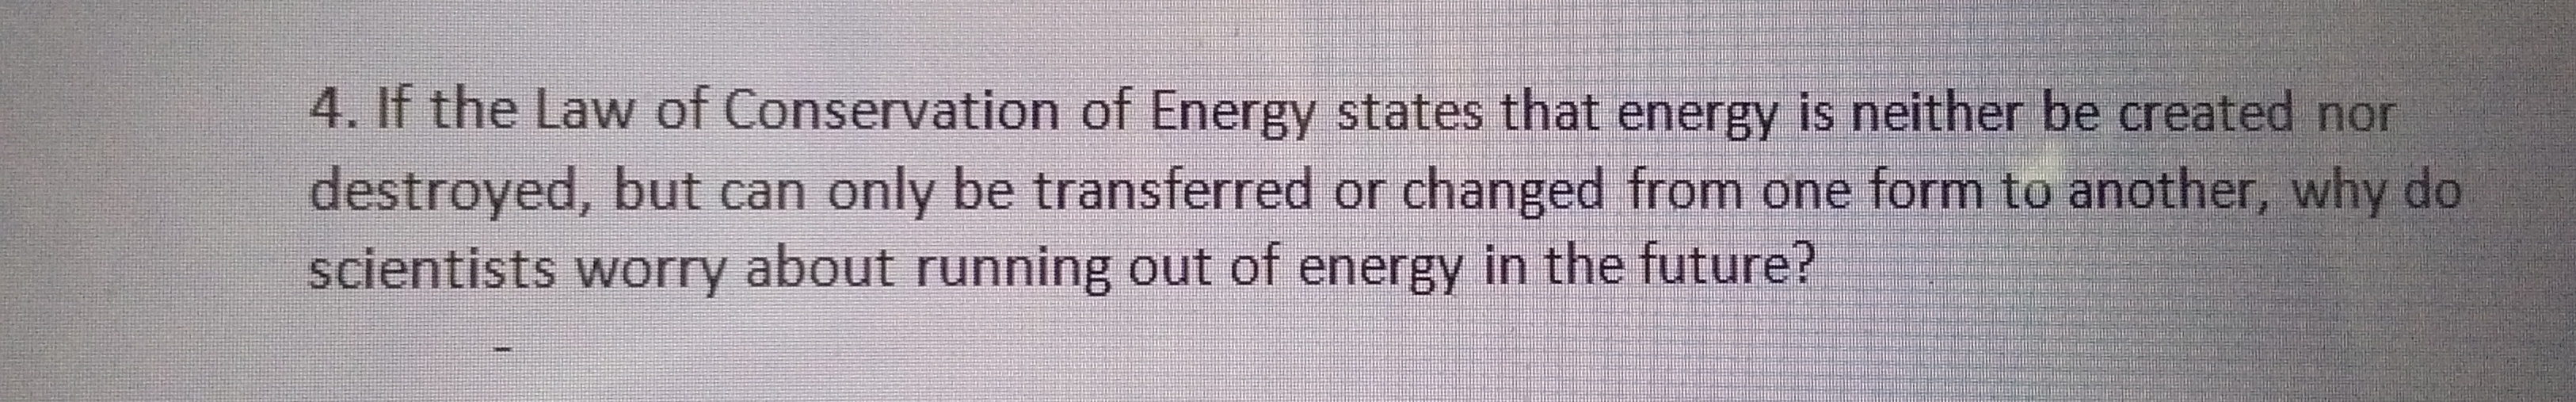 4. If the Law of Conservation of Energy states that energy is neither be created nor
destroyed, but can only be transferred or changed from one form to another, why do
scientists worry about running out of energy in the future?
